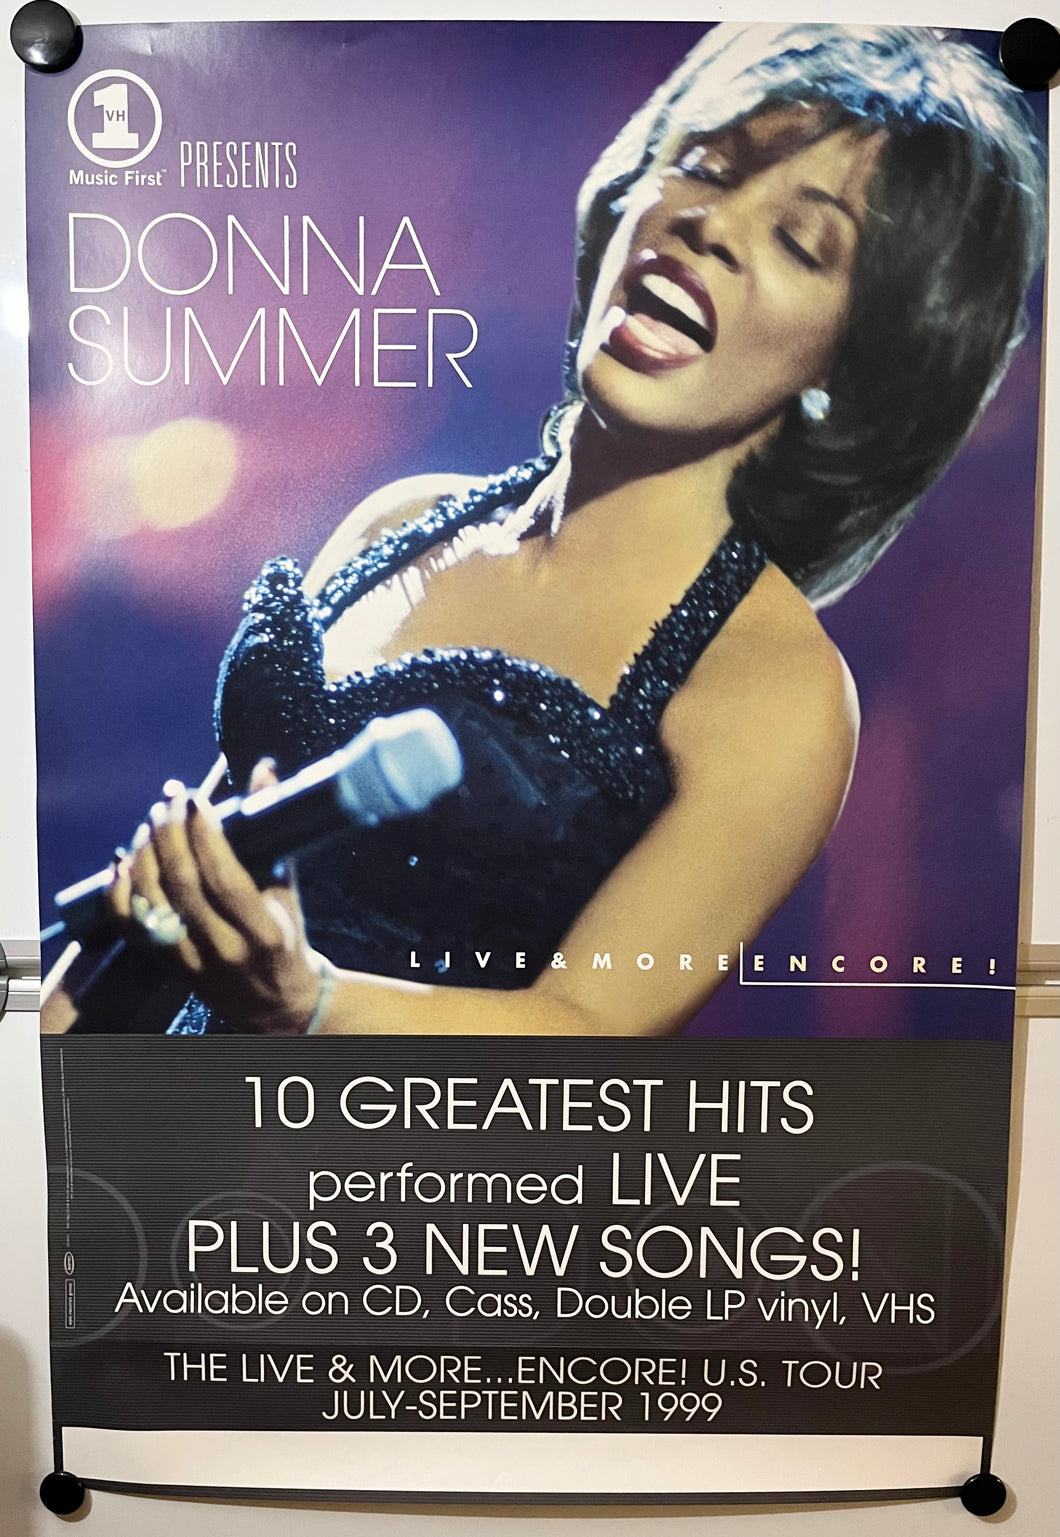 Donna Summer - 24” x 36” Promotional Poster